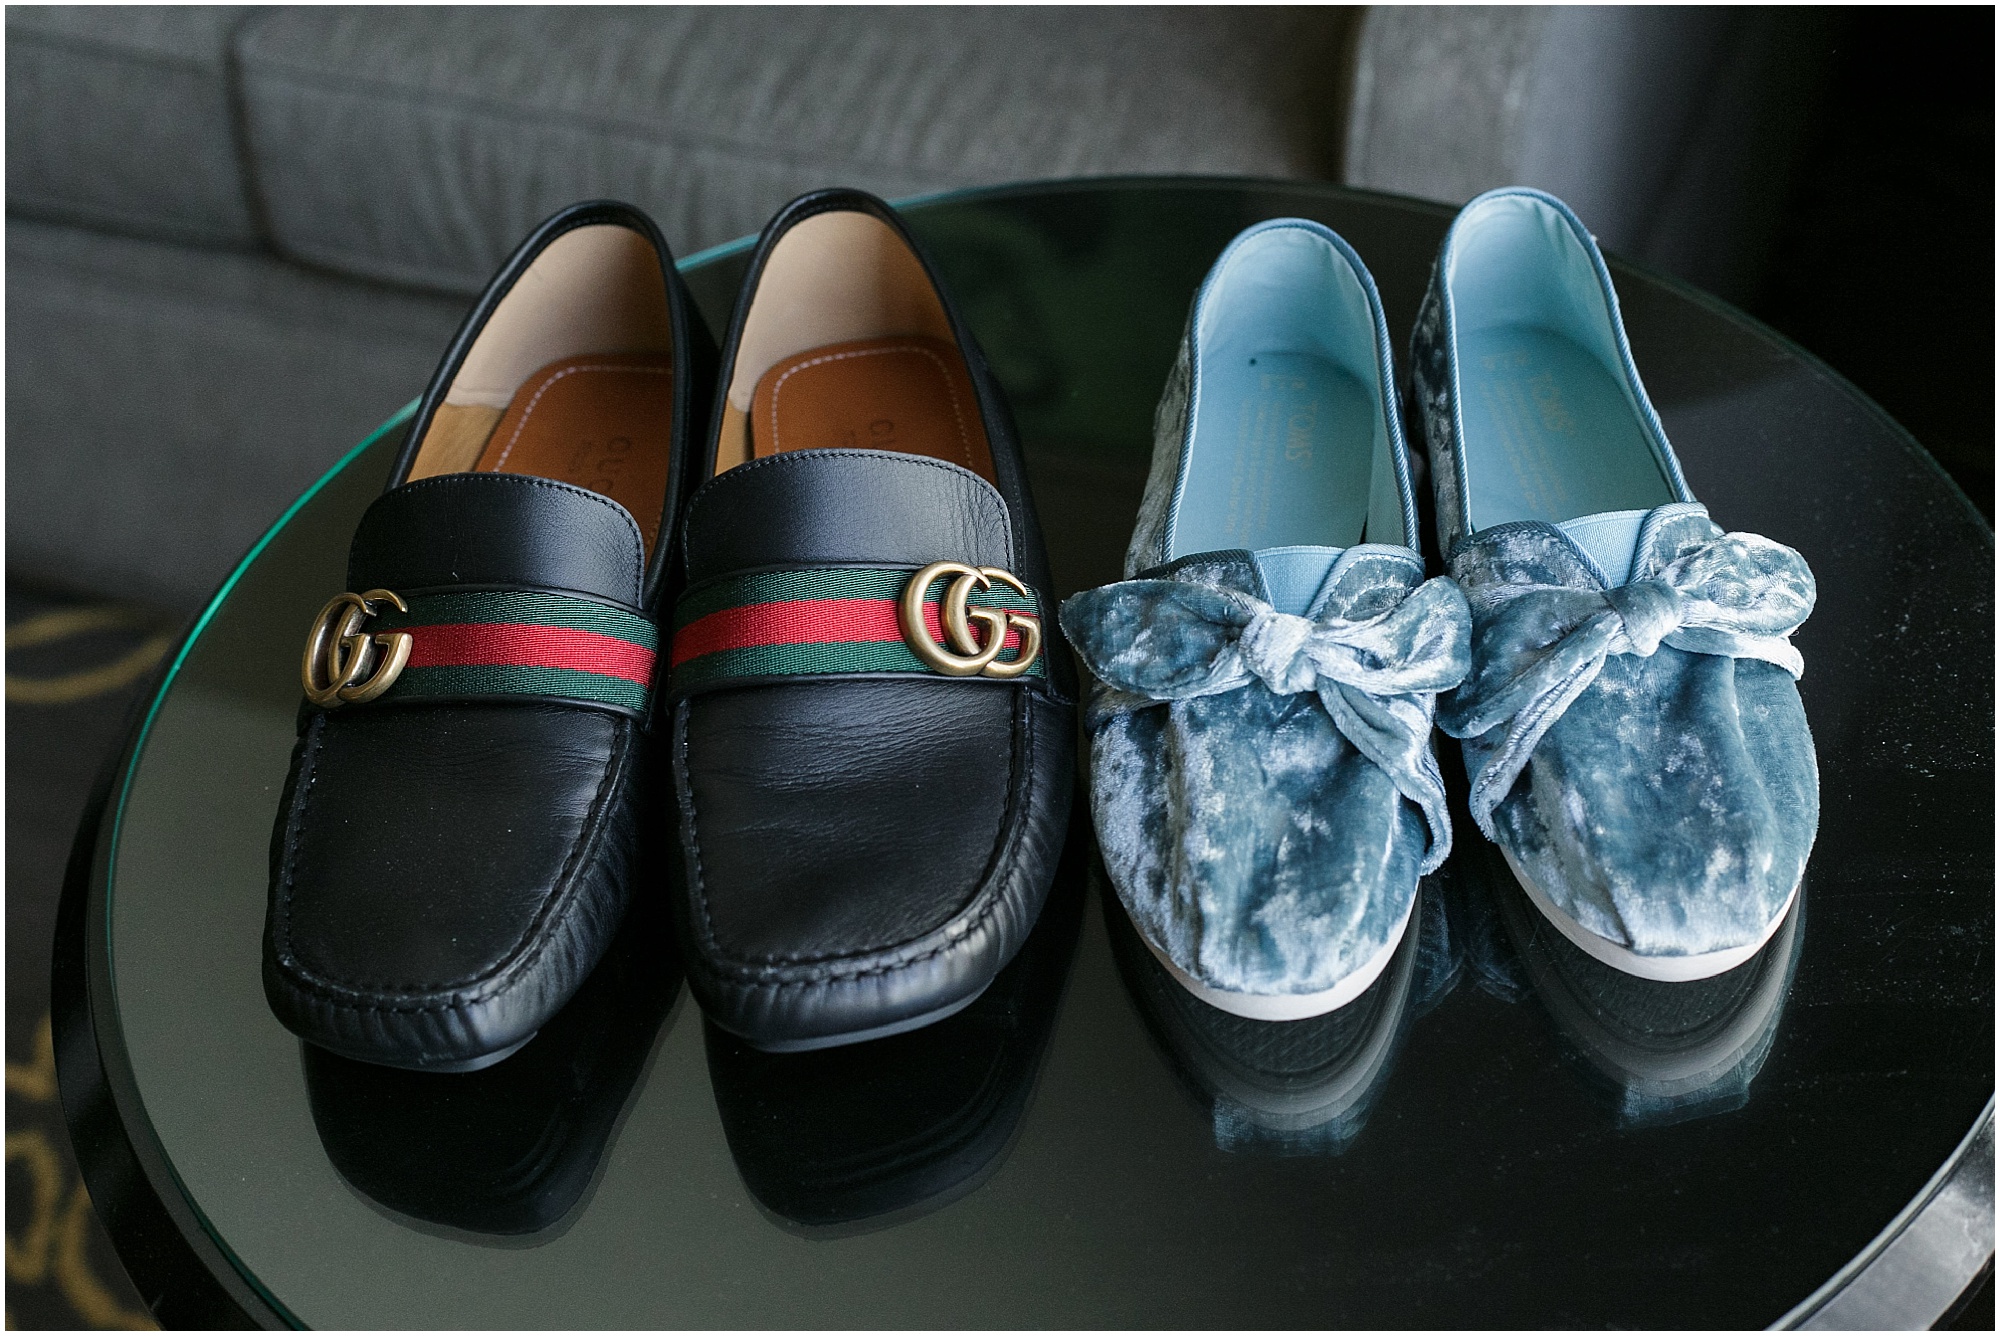 Bride's TOMs shoes and grooms Gucci shoes for wedding day attire.